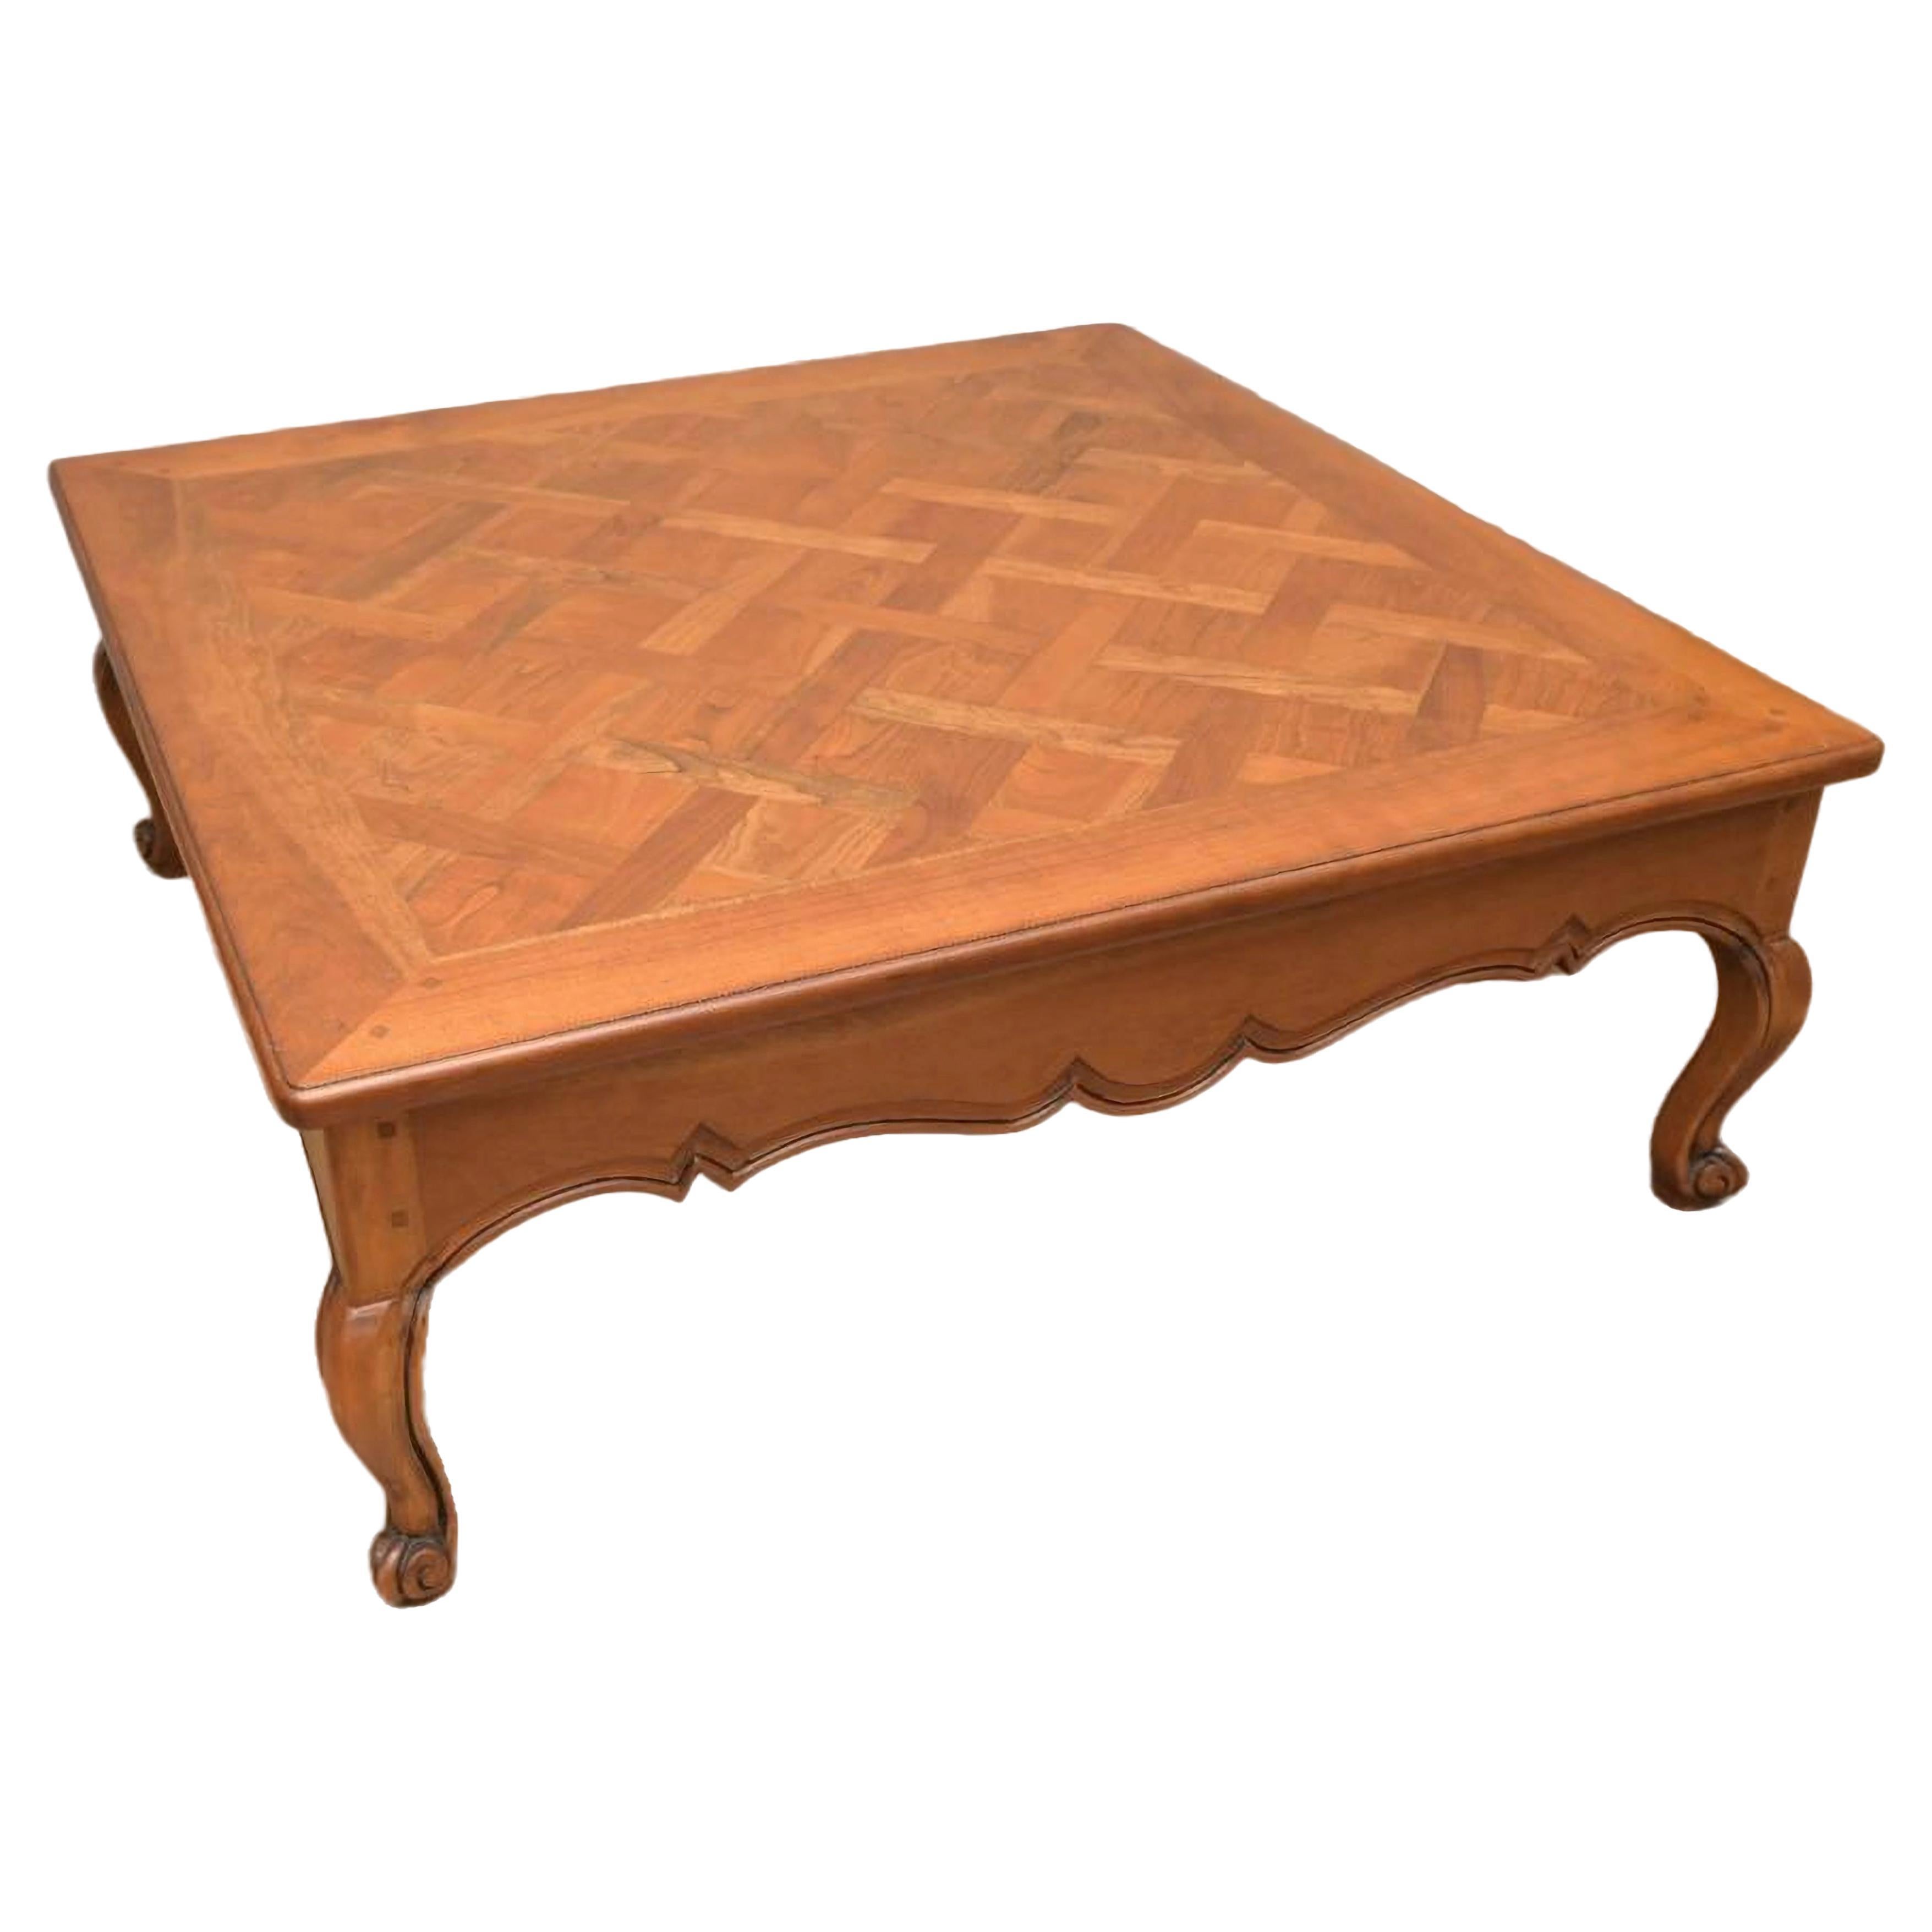 A Square French Provincial Style Parquetry Coffee Table For Sale